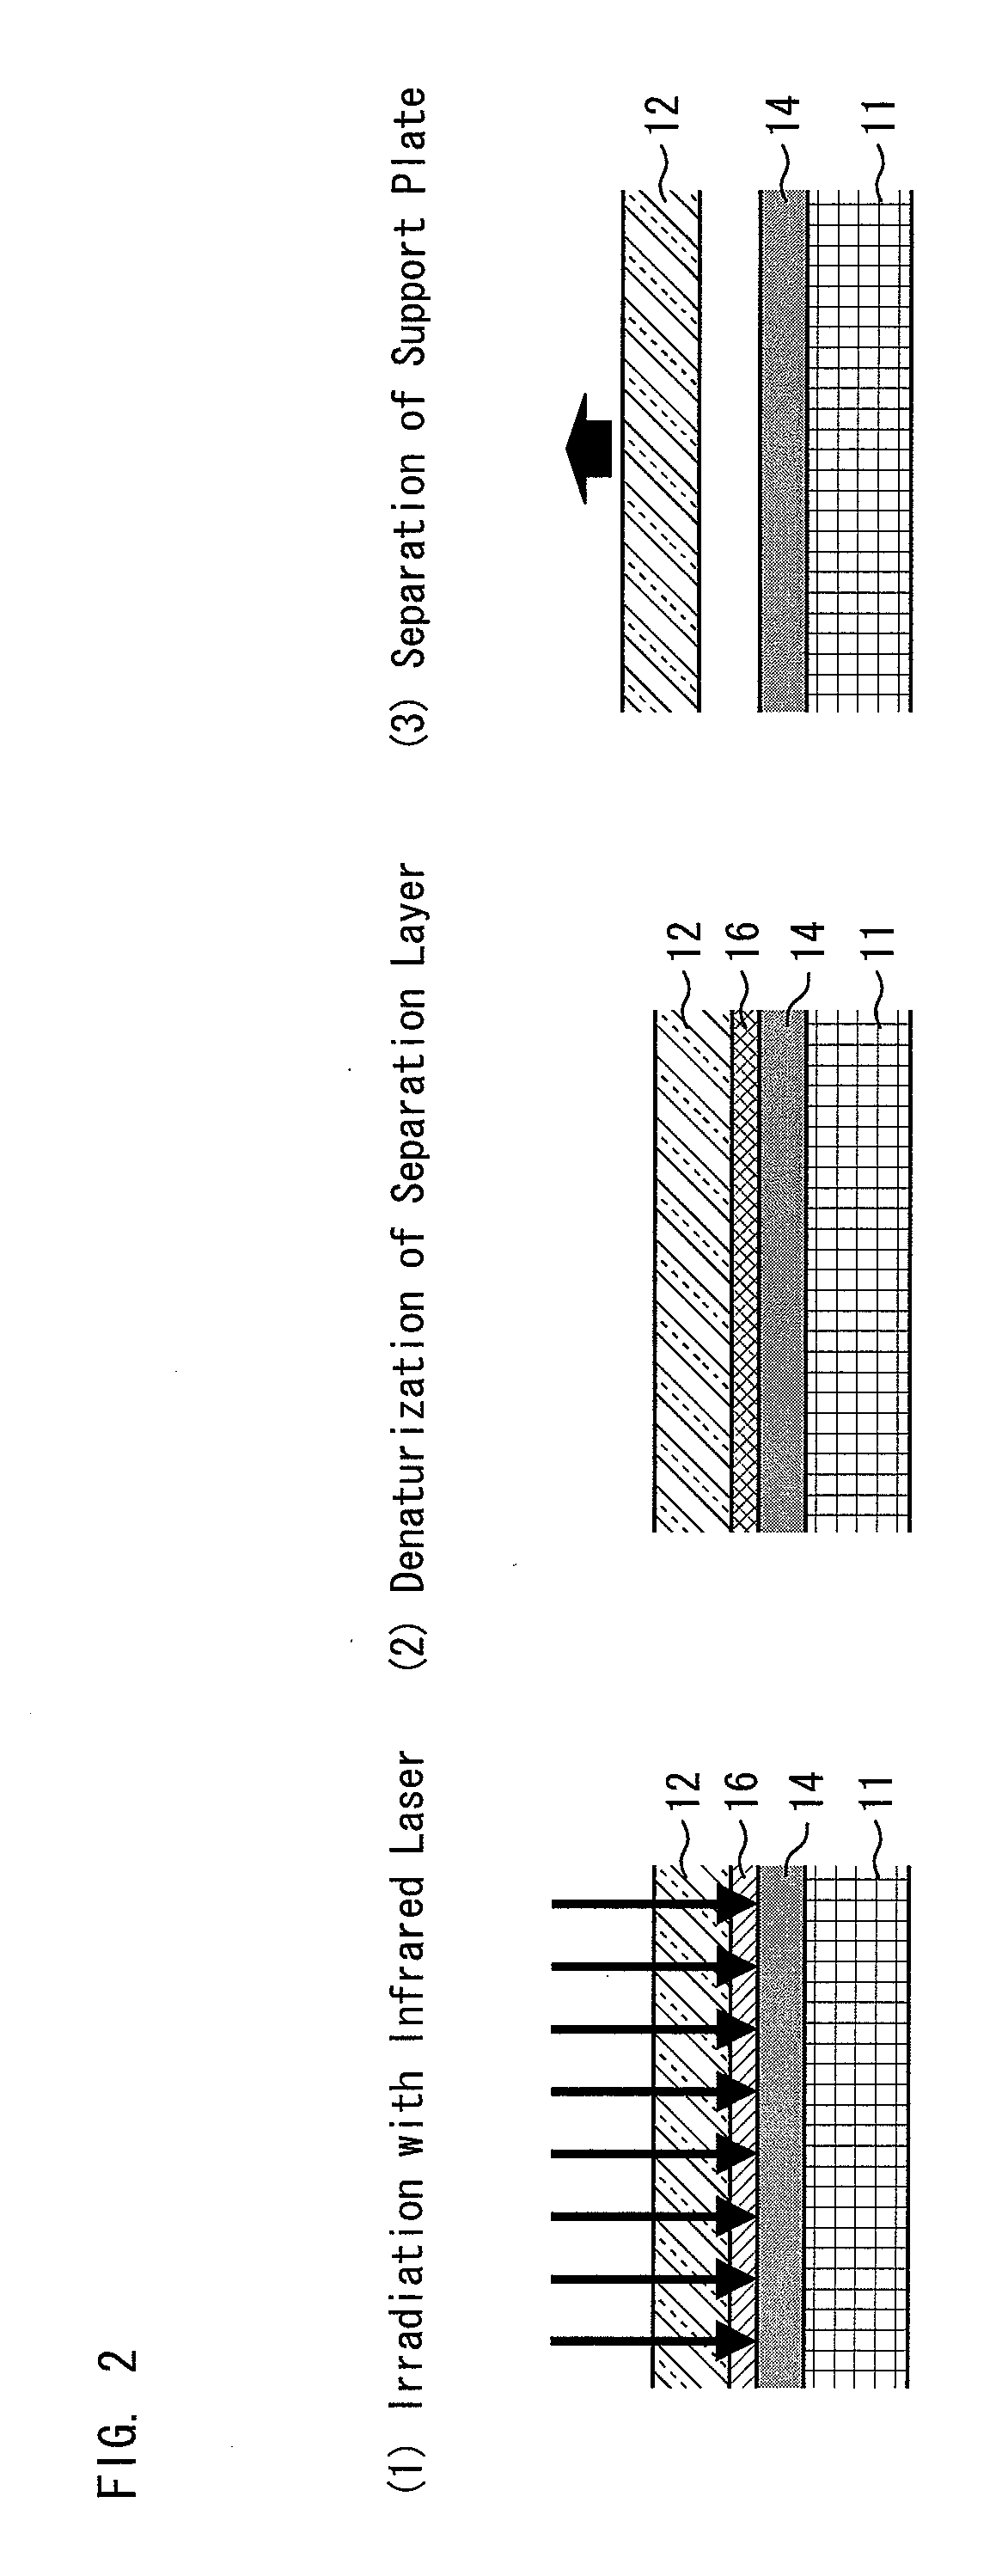 Laminate and method for separating the same